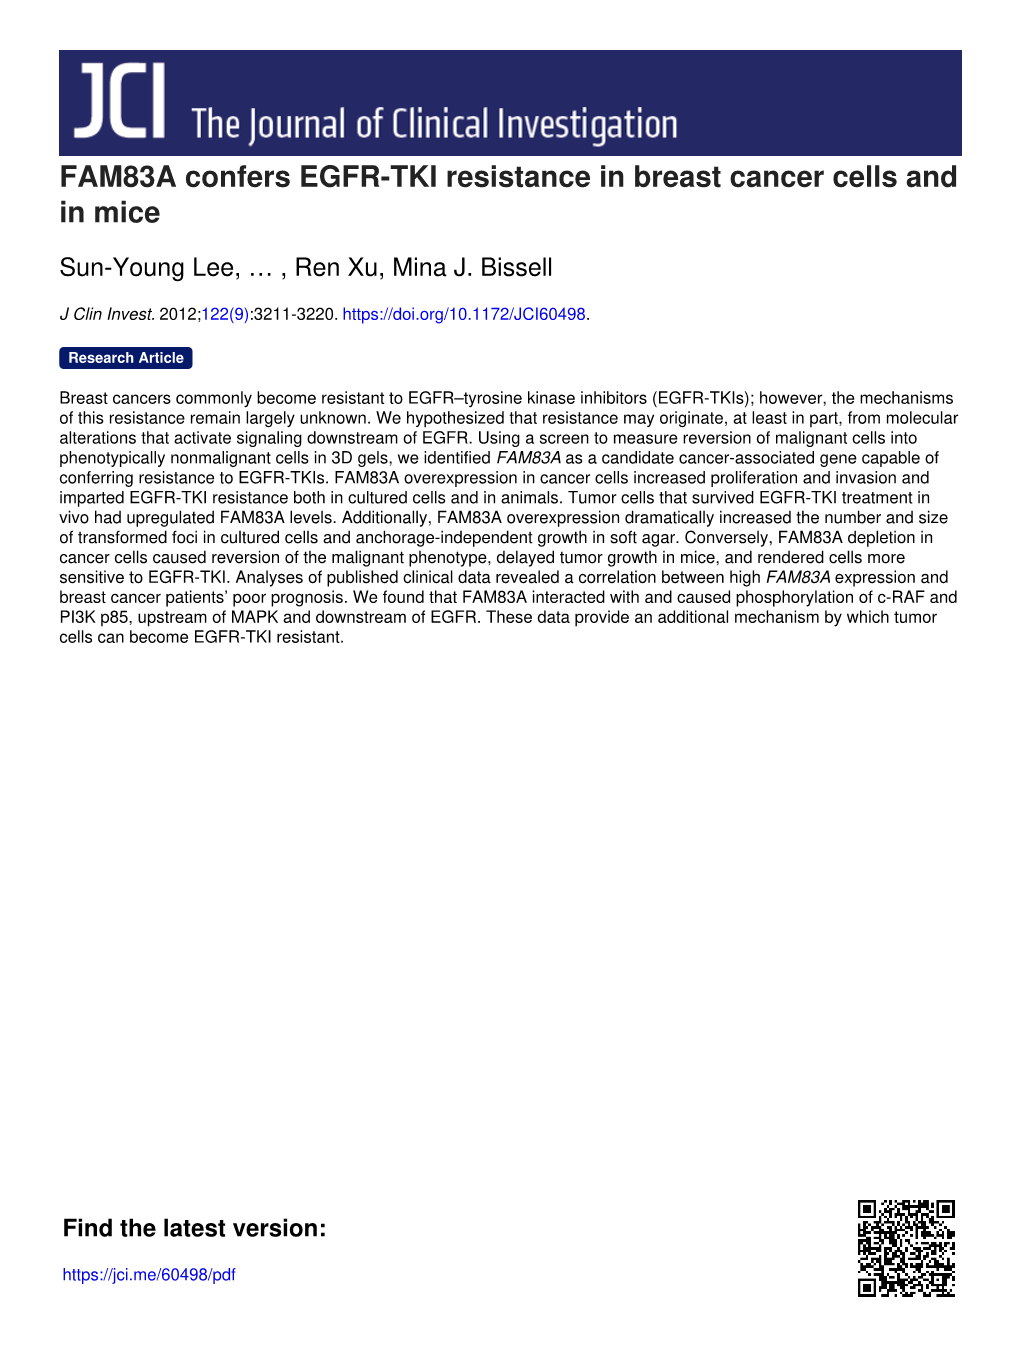 FAM83A Confers EGFR-TKI Resistance in Breast Cancer Cells and in Mice